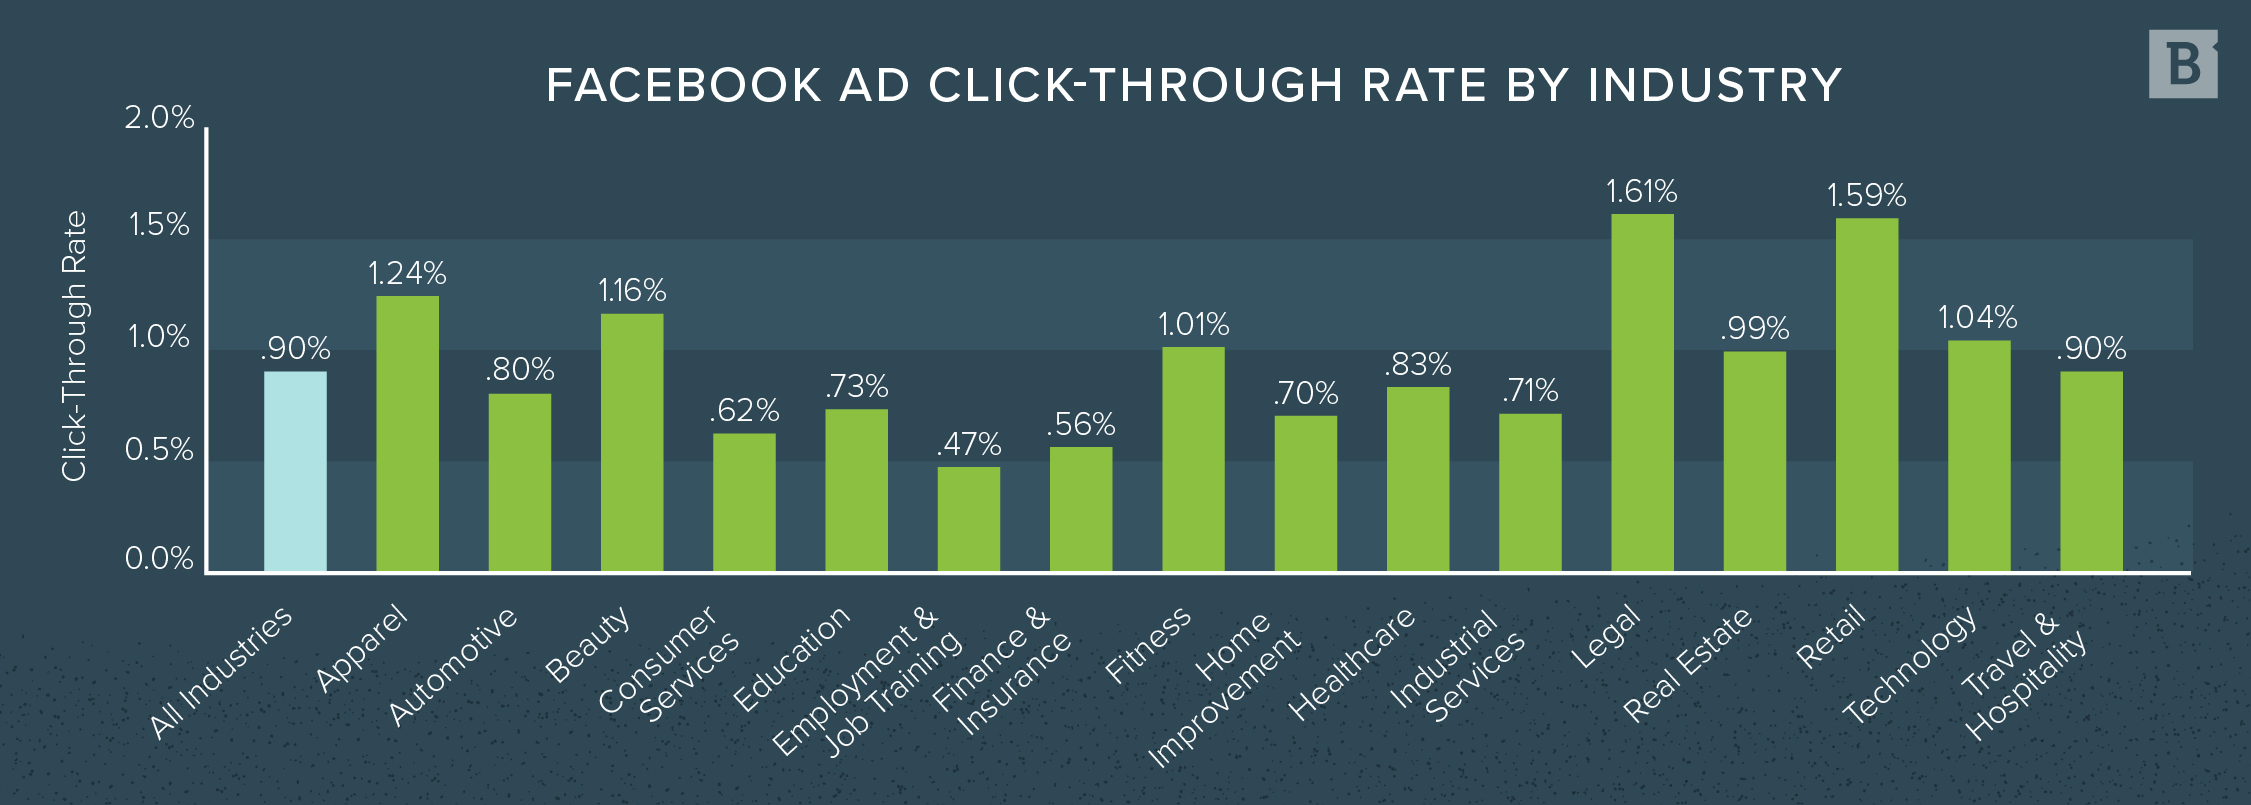 Facebook Ad Click Through Rate by Industry